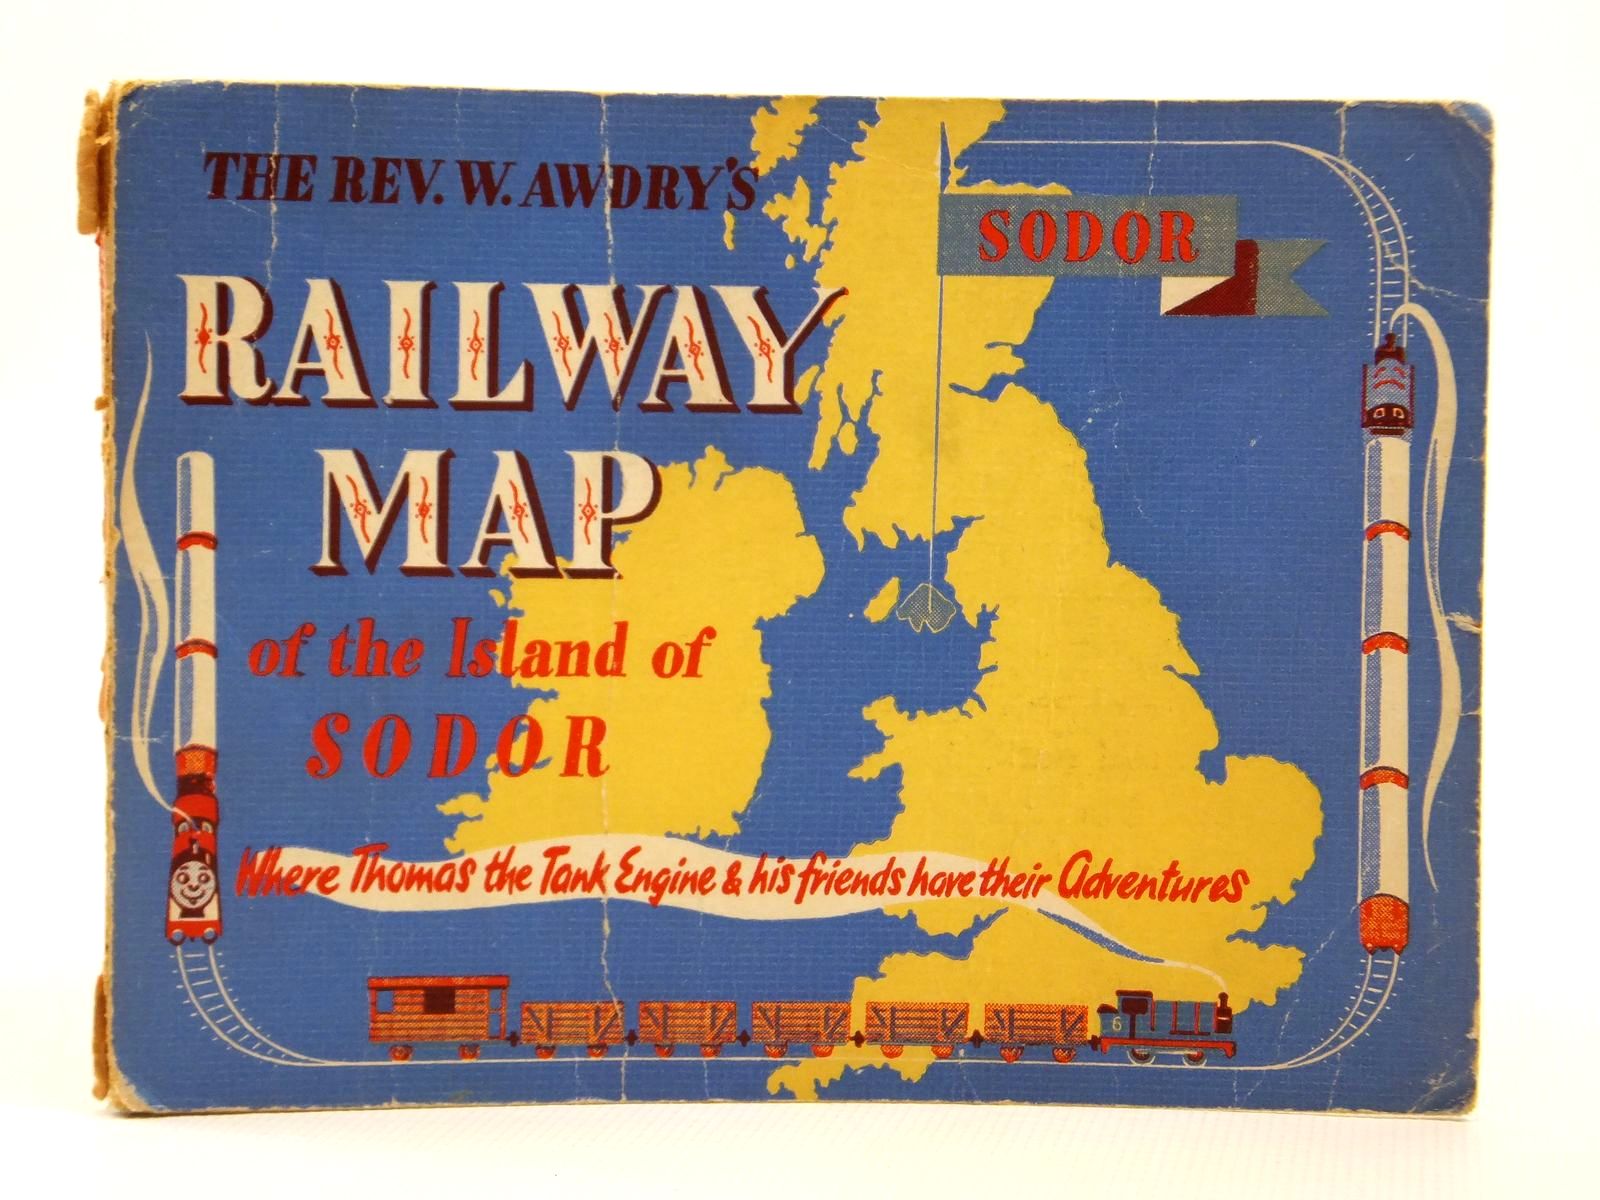 Detailed Maps Of The Islands Of Sodor